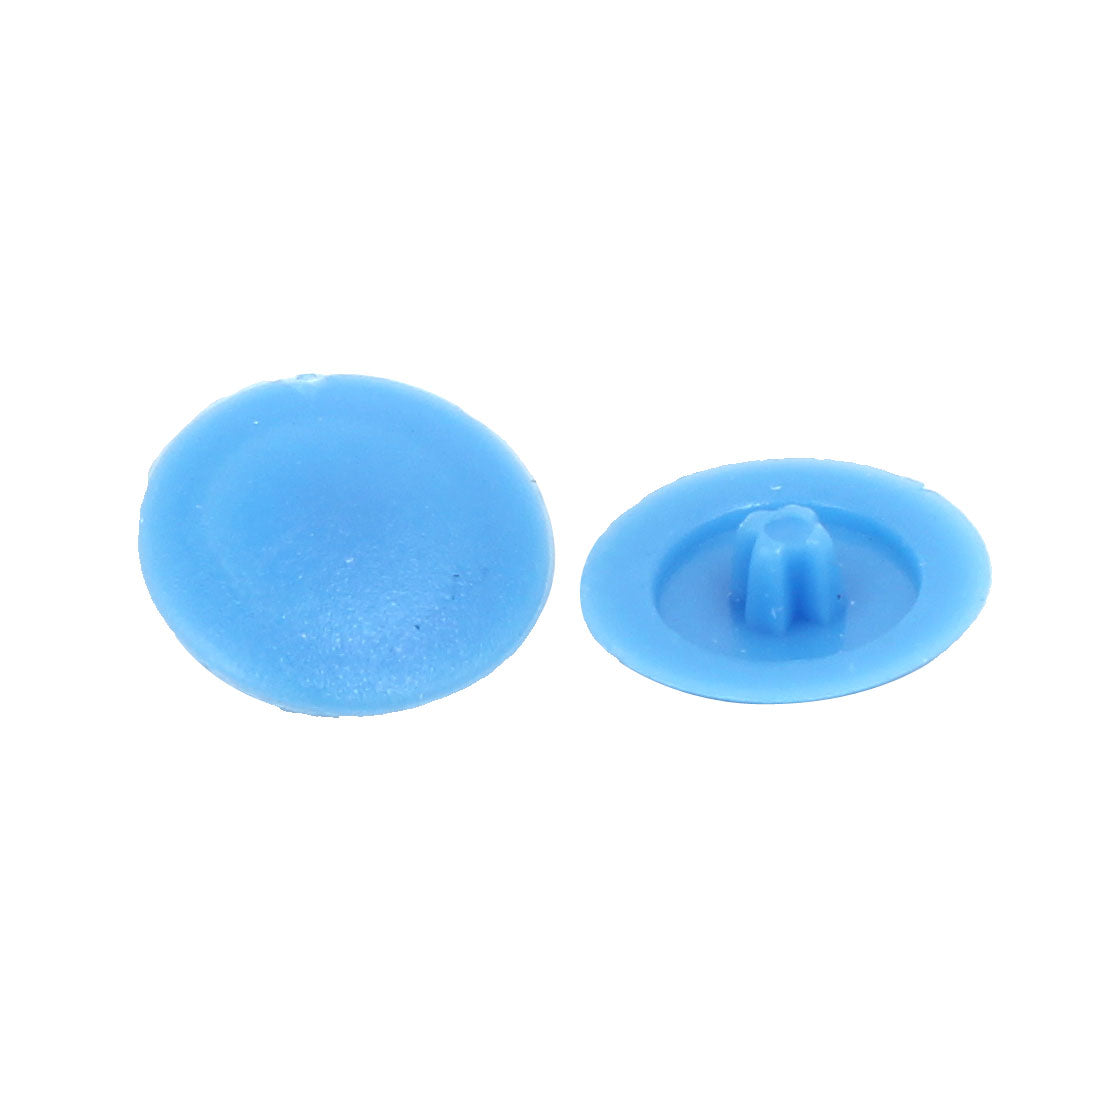 uxcell Uxcell 12mm Dia Plastic Phillips Screw Cap Hole Plugs Dust Proof Covers Blue 100pcs